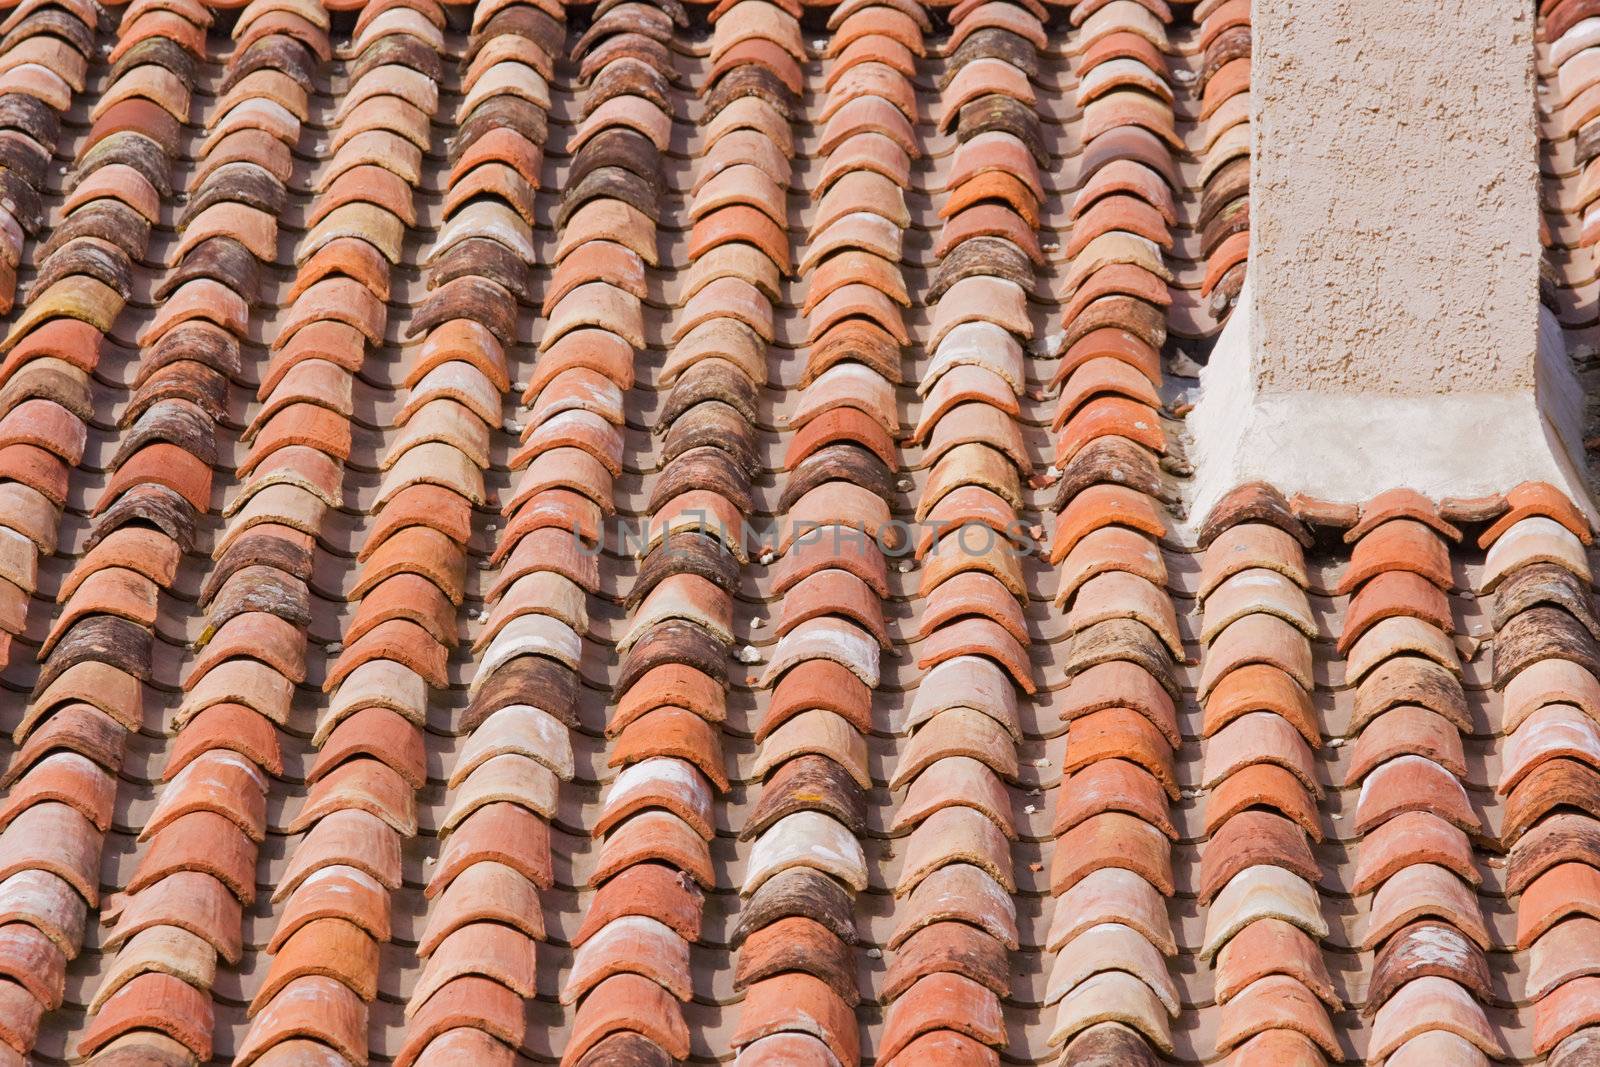 Tiles and Chimney by pjhpix